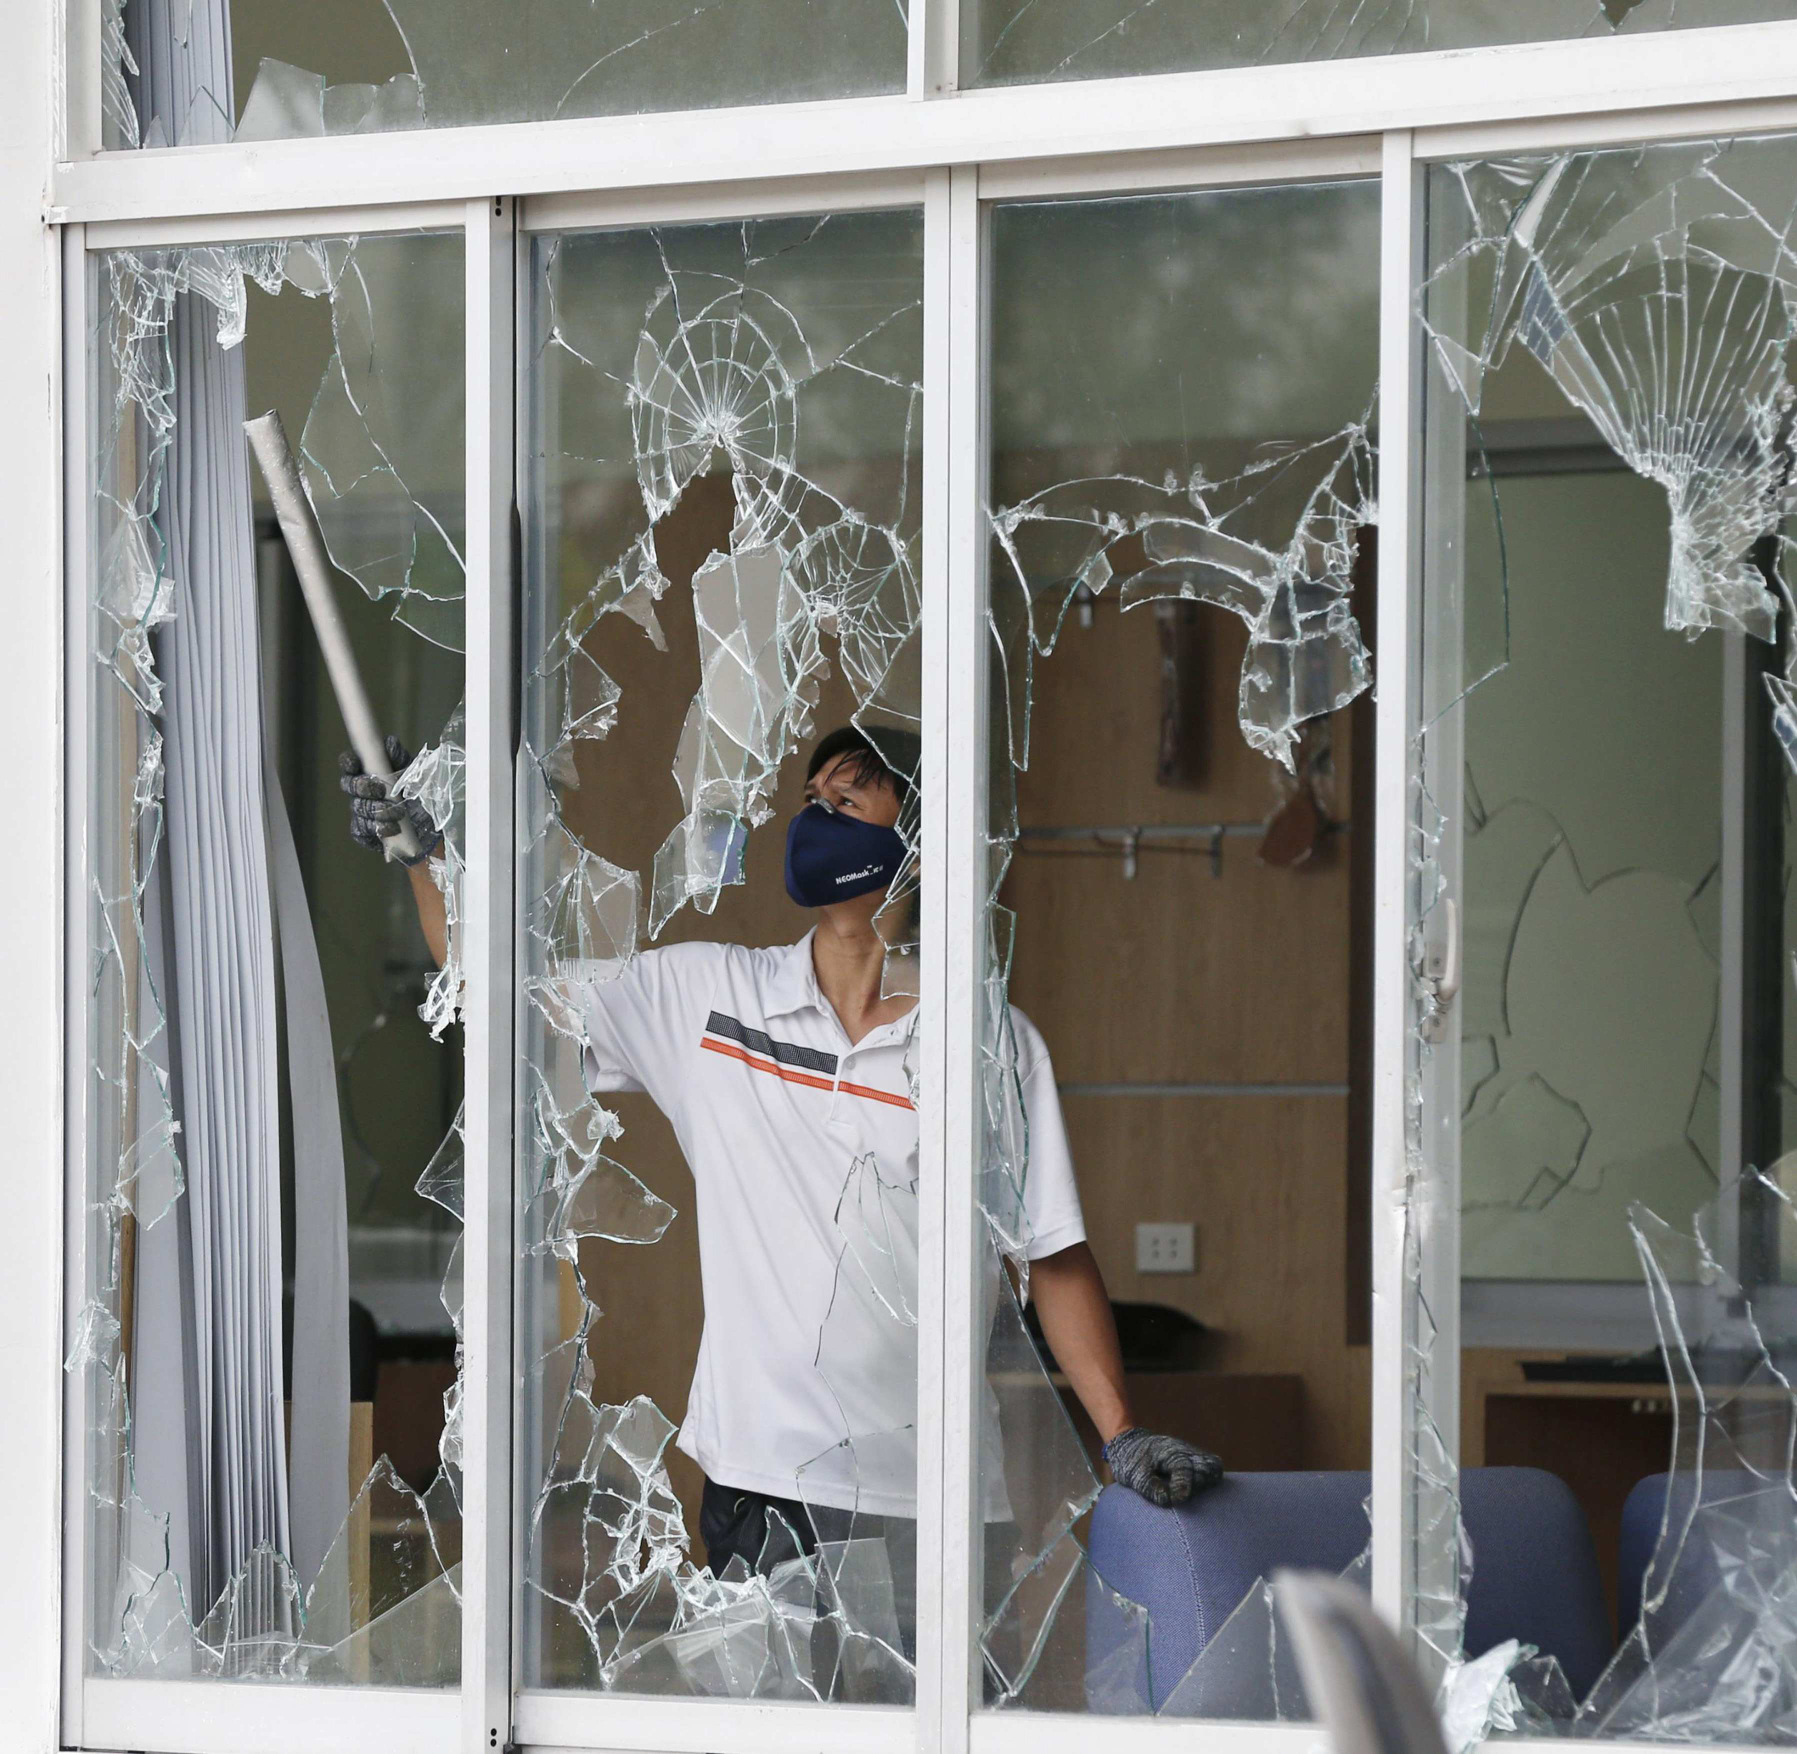 A man clears broken windows at the office of a Taiwanese company attacked in anti-China protests in Vietnam. Photo: Reuters